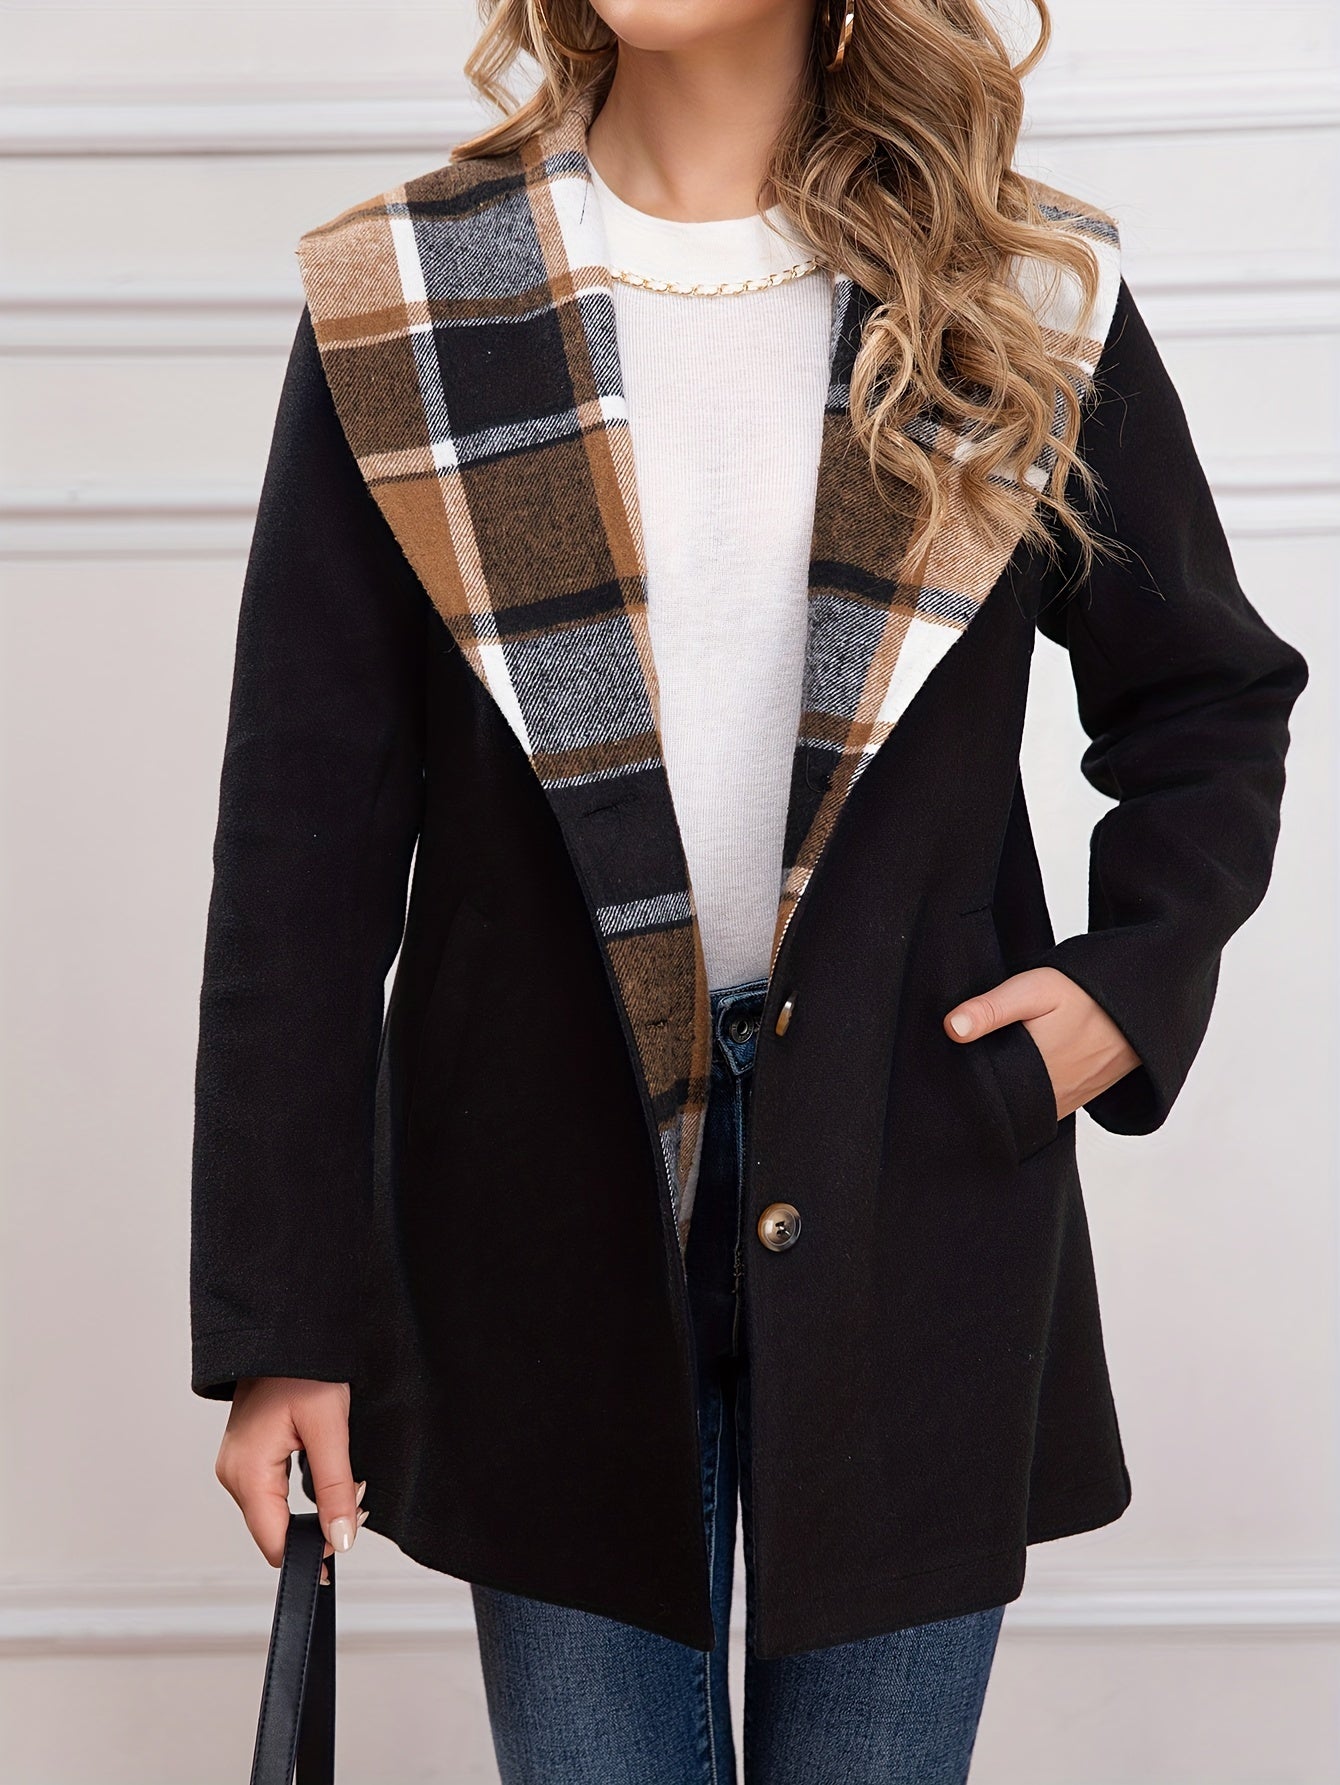 Plaid Print Splicing Coat, Casual Waterfall Collar Button Front Outerwear, Women's Clothing